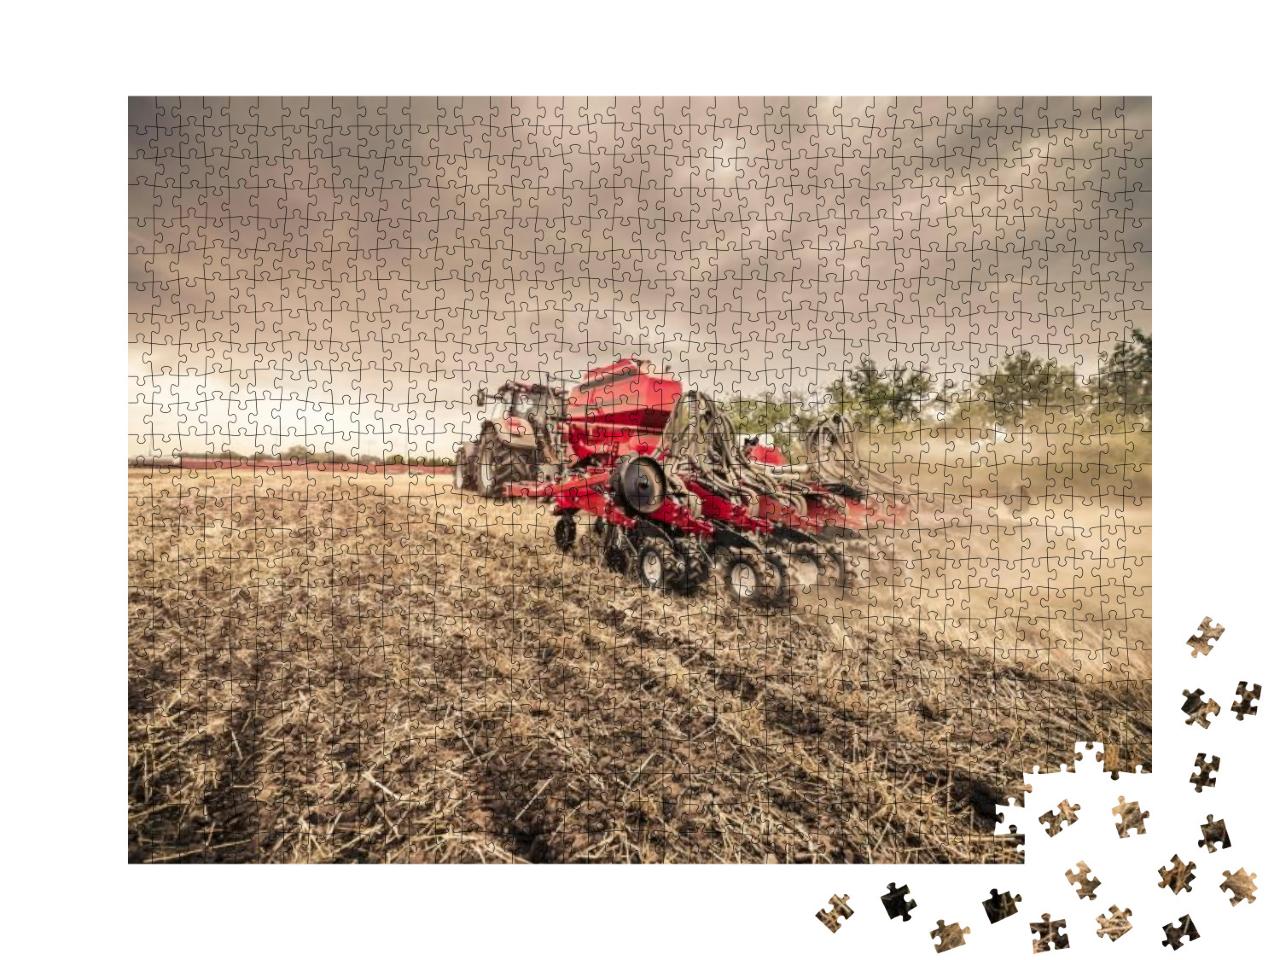 Modern Red Tractor with Red Implement Seeding Directly In... Jigsaw Puzzle with 1000 pieces